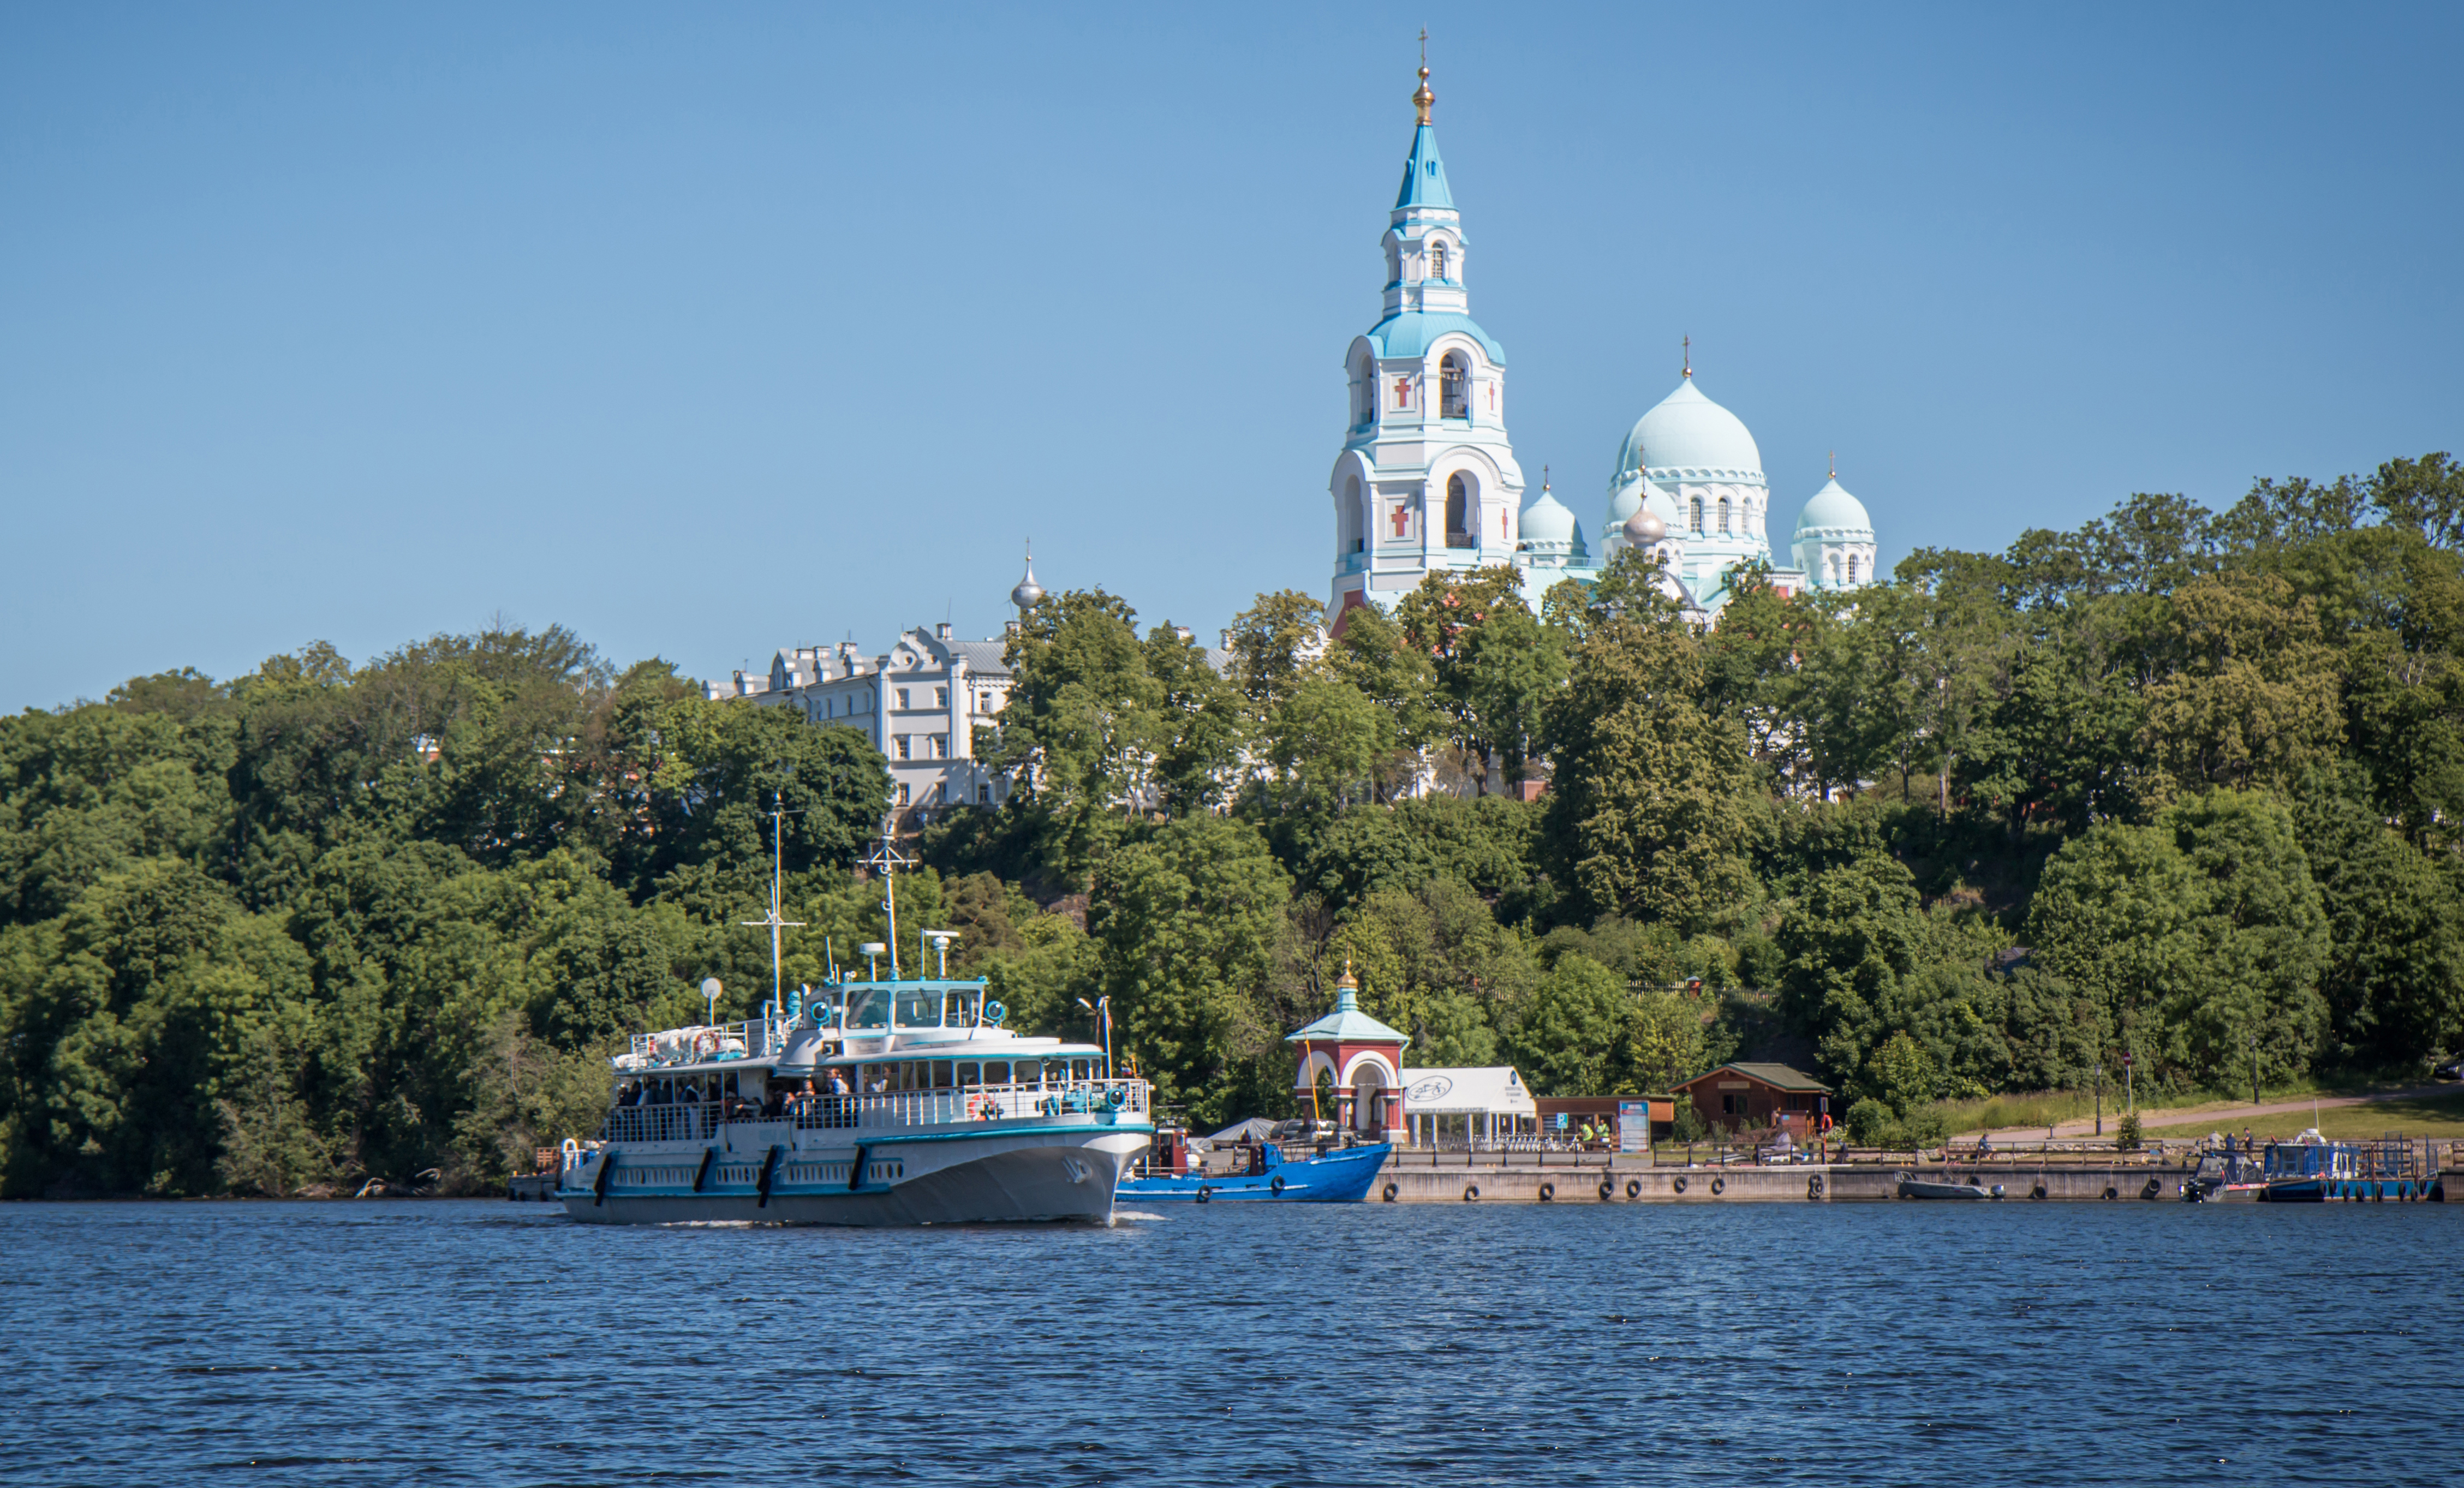 The Monastery of Valaam Island in Lake Ladoga attracts tourists from all over the world. Photo by Stanislav Trofimov.